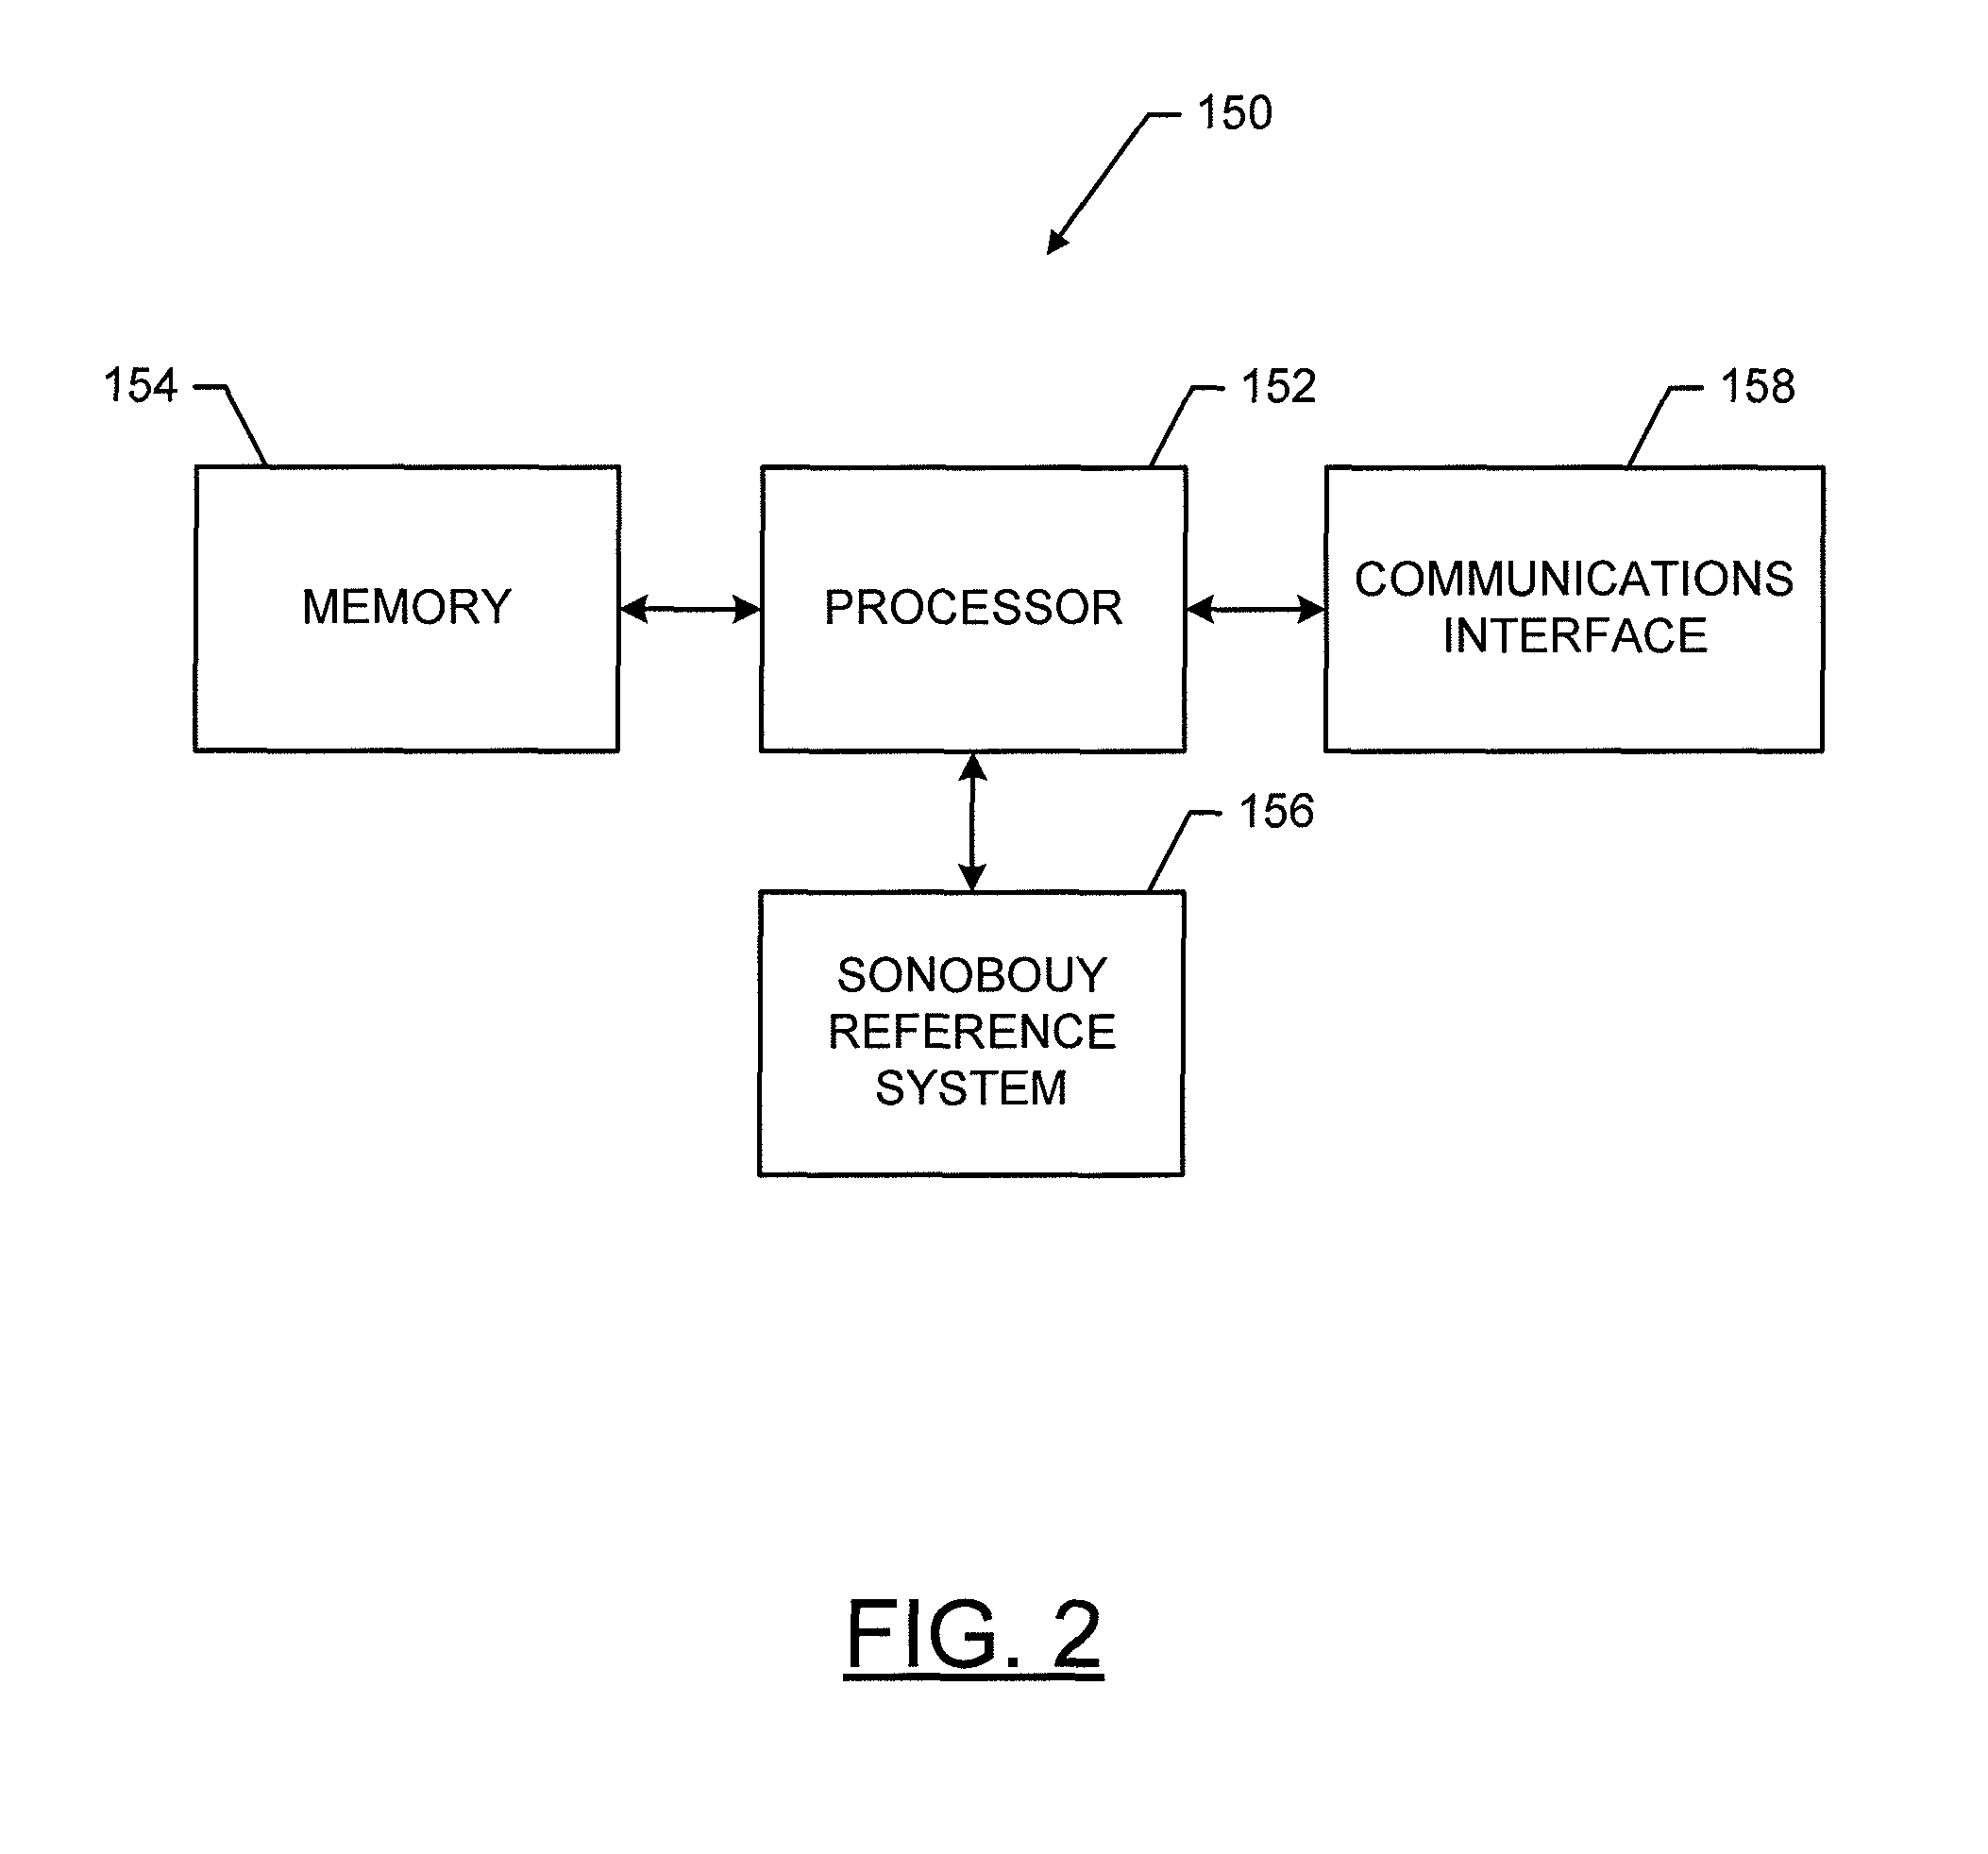 Method and apparatus for determining the relative position of a target